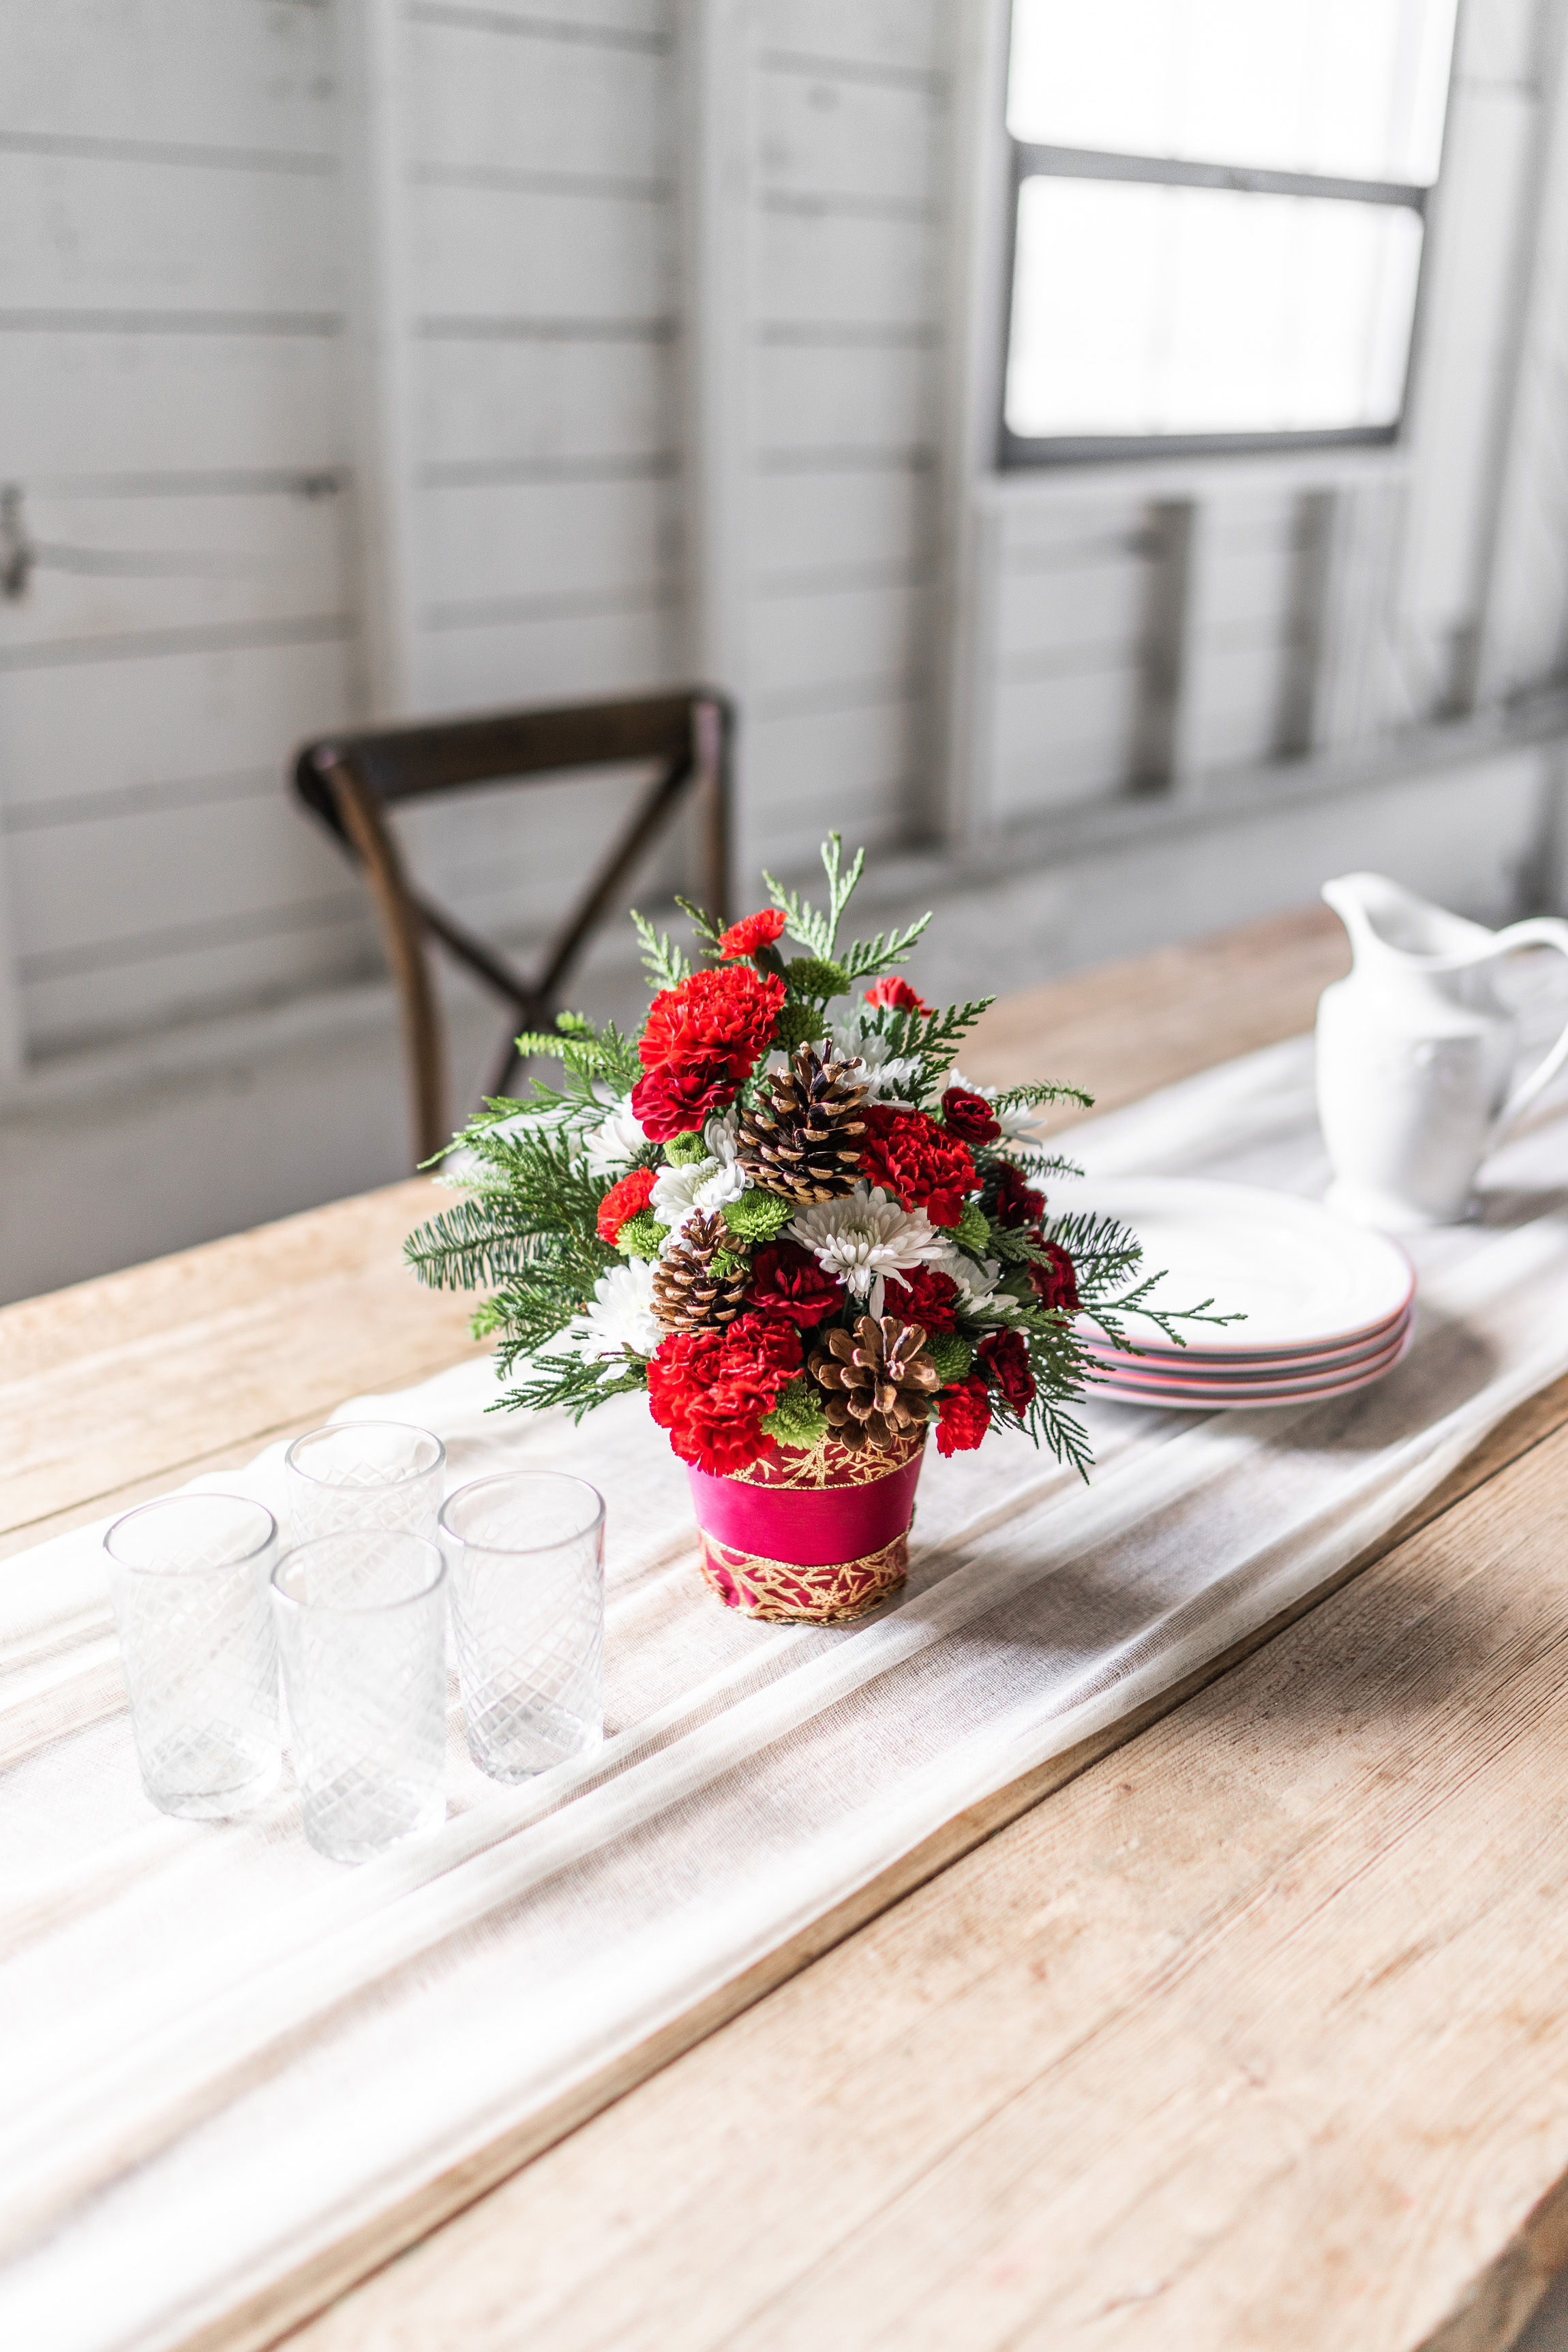 Cute Christmas Centerpiece with Carnations